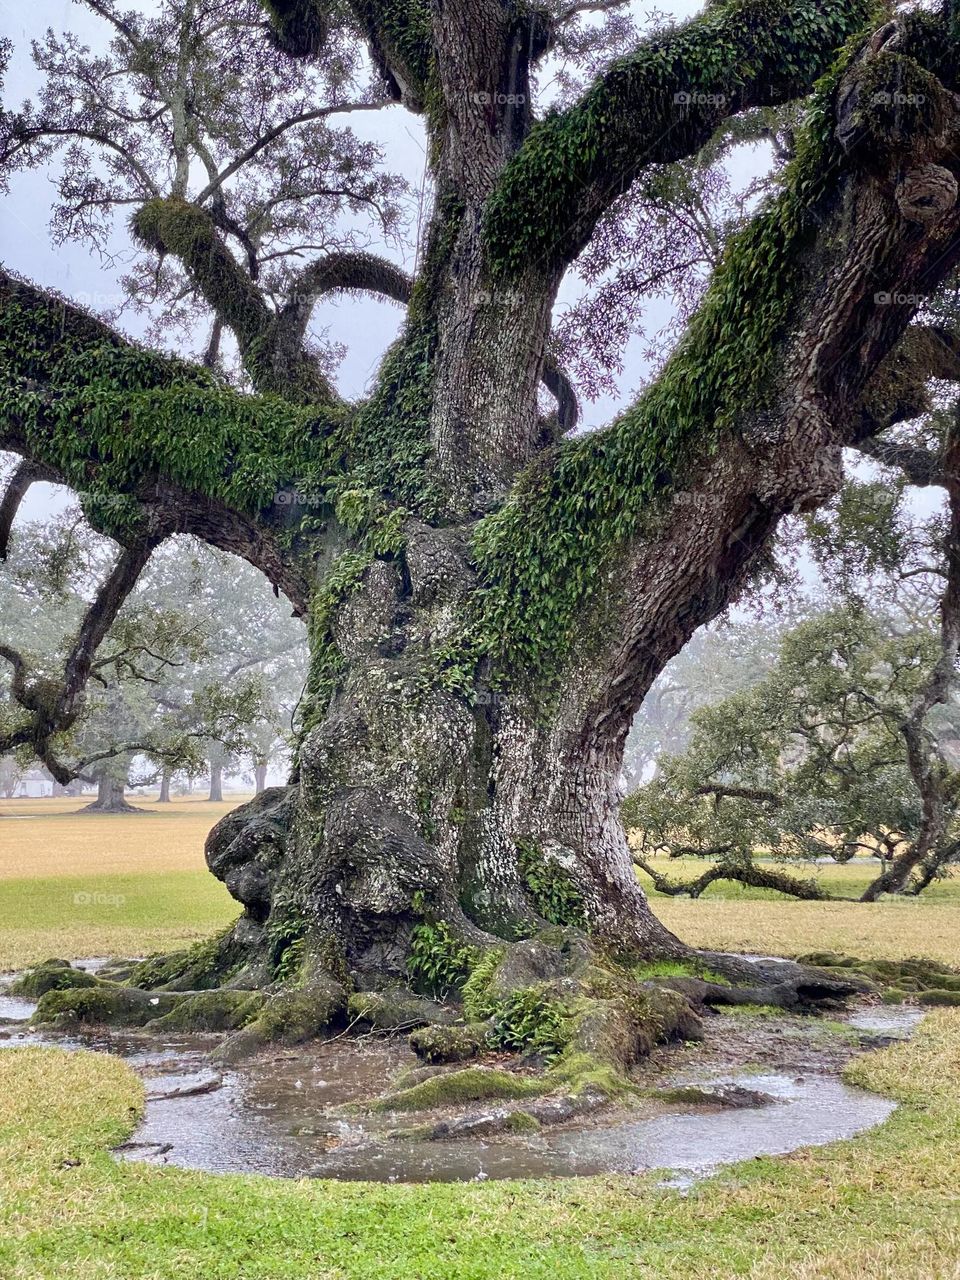 An old live oak tree covered in vines